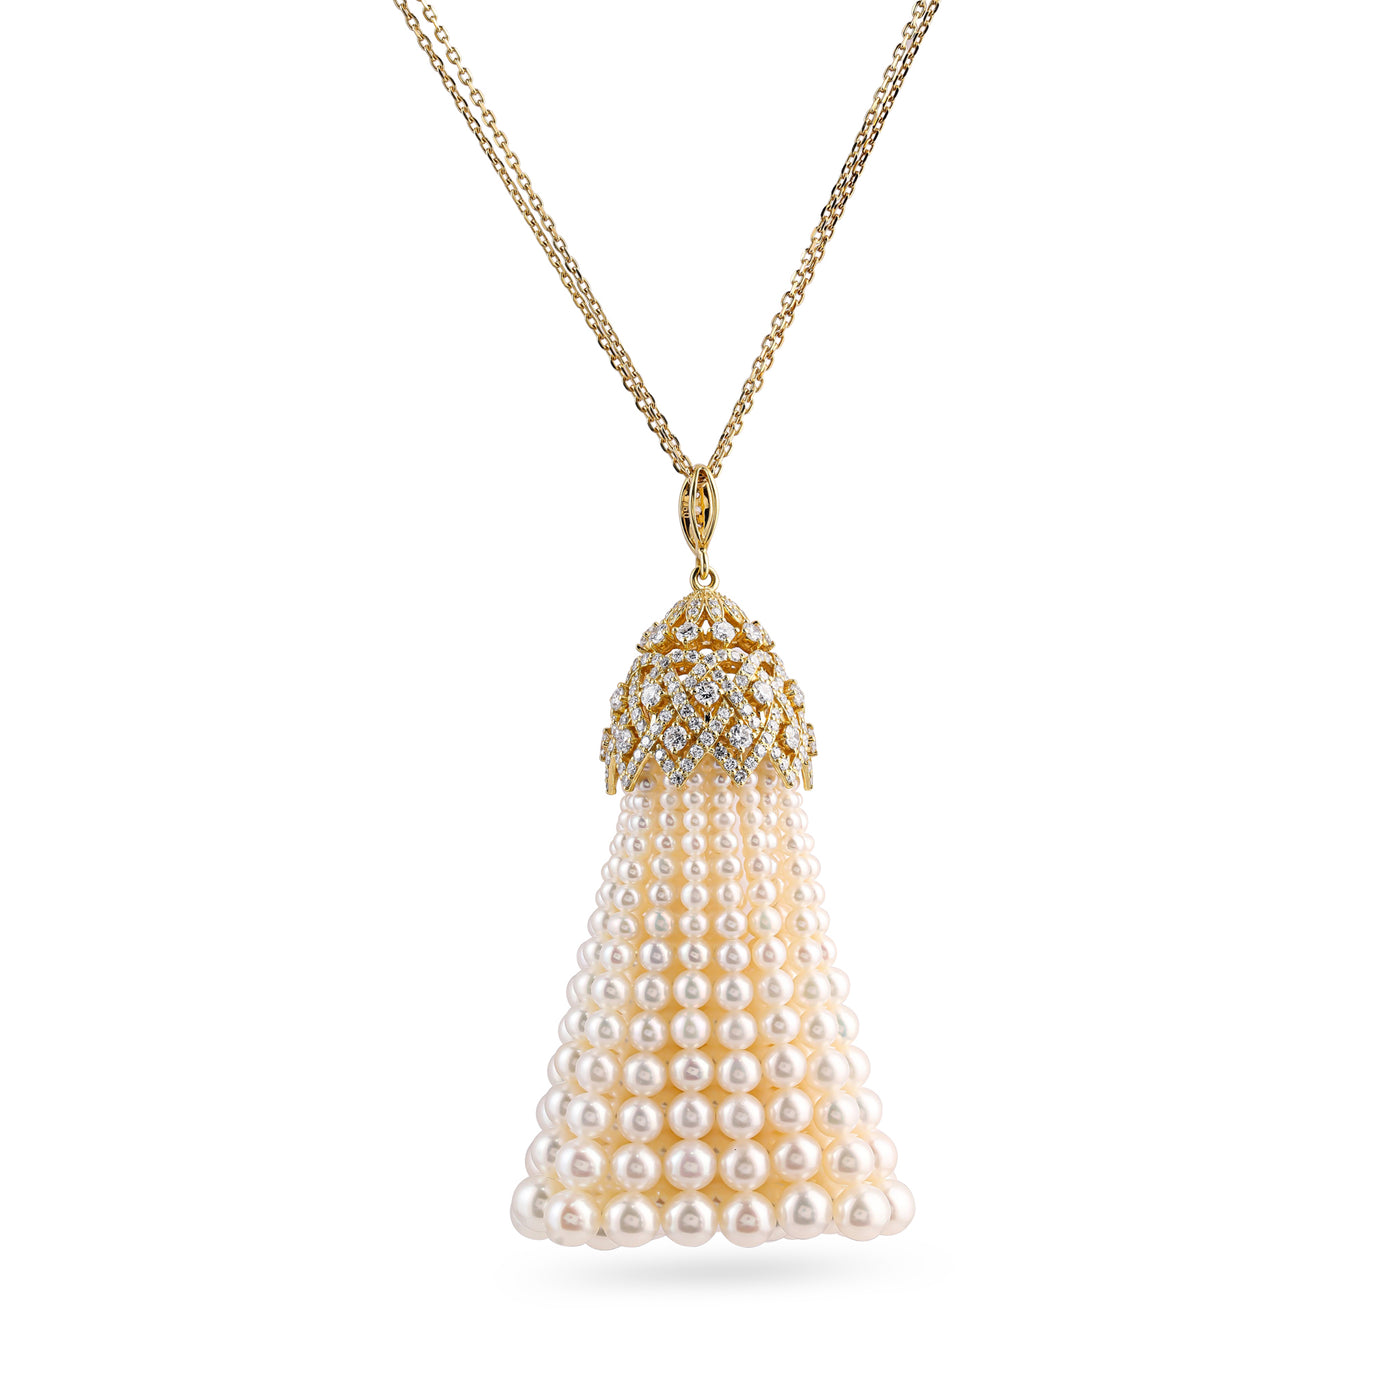 Soit Belle Yellow Gold Diamond Pendant with Pearls